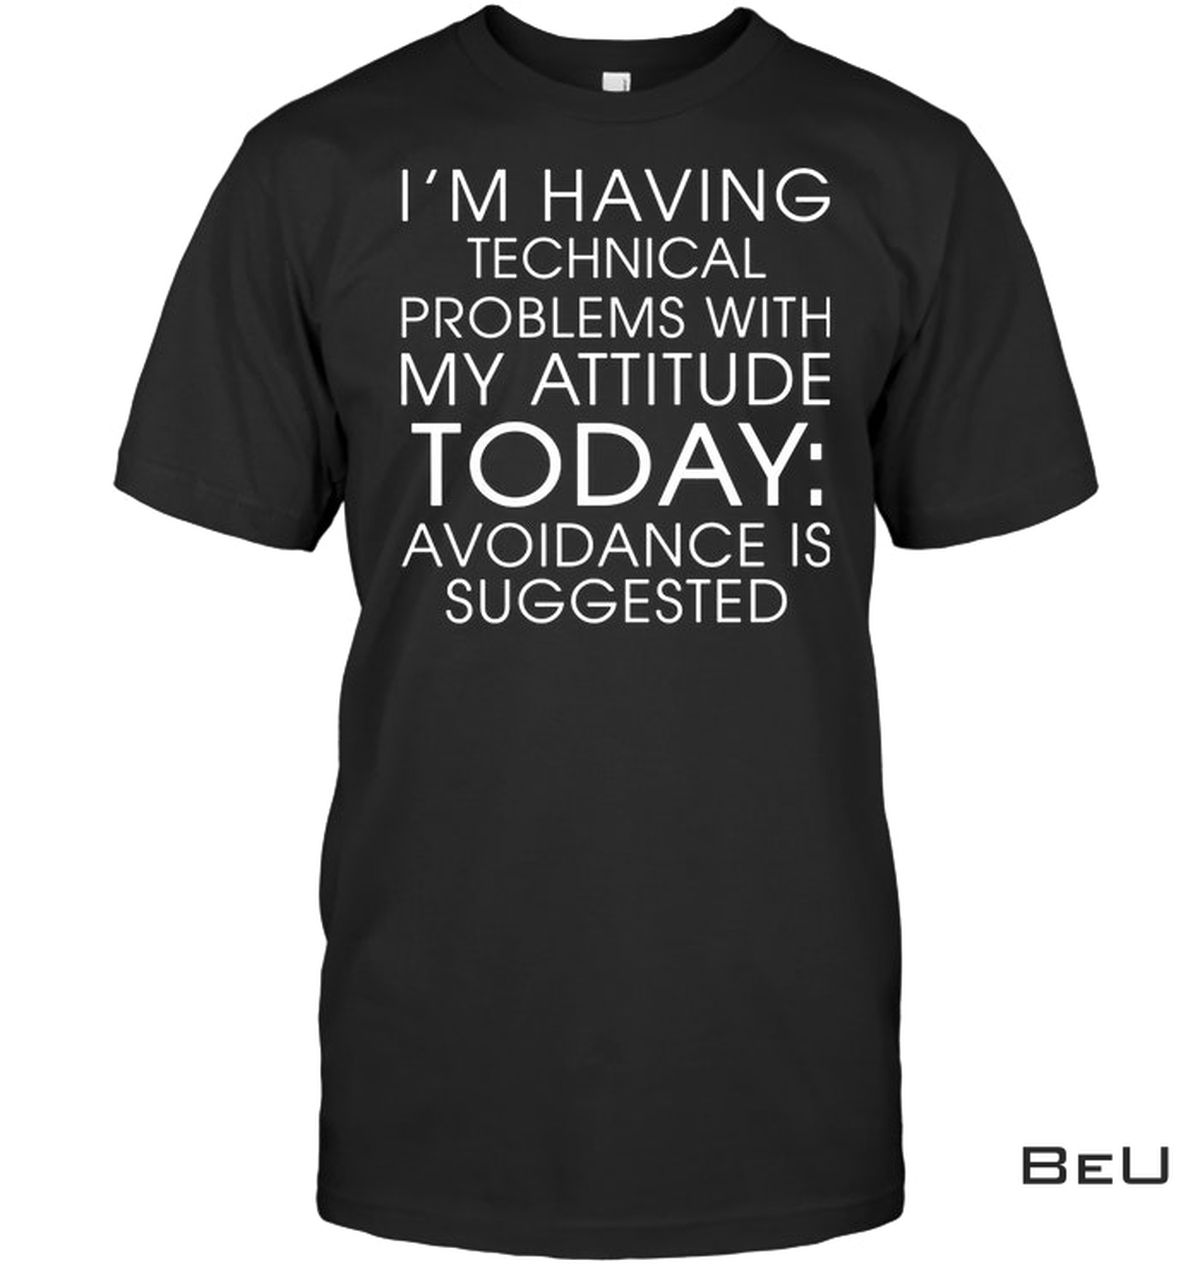 I'm Having Technical Problems With My Attitude Today Shirt